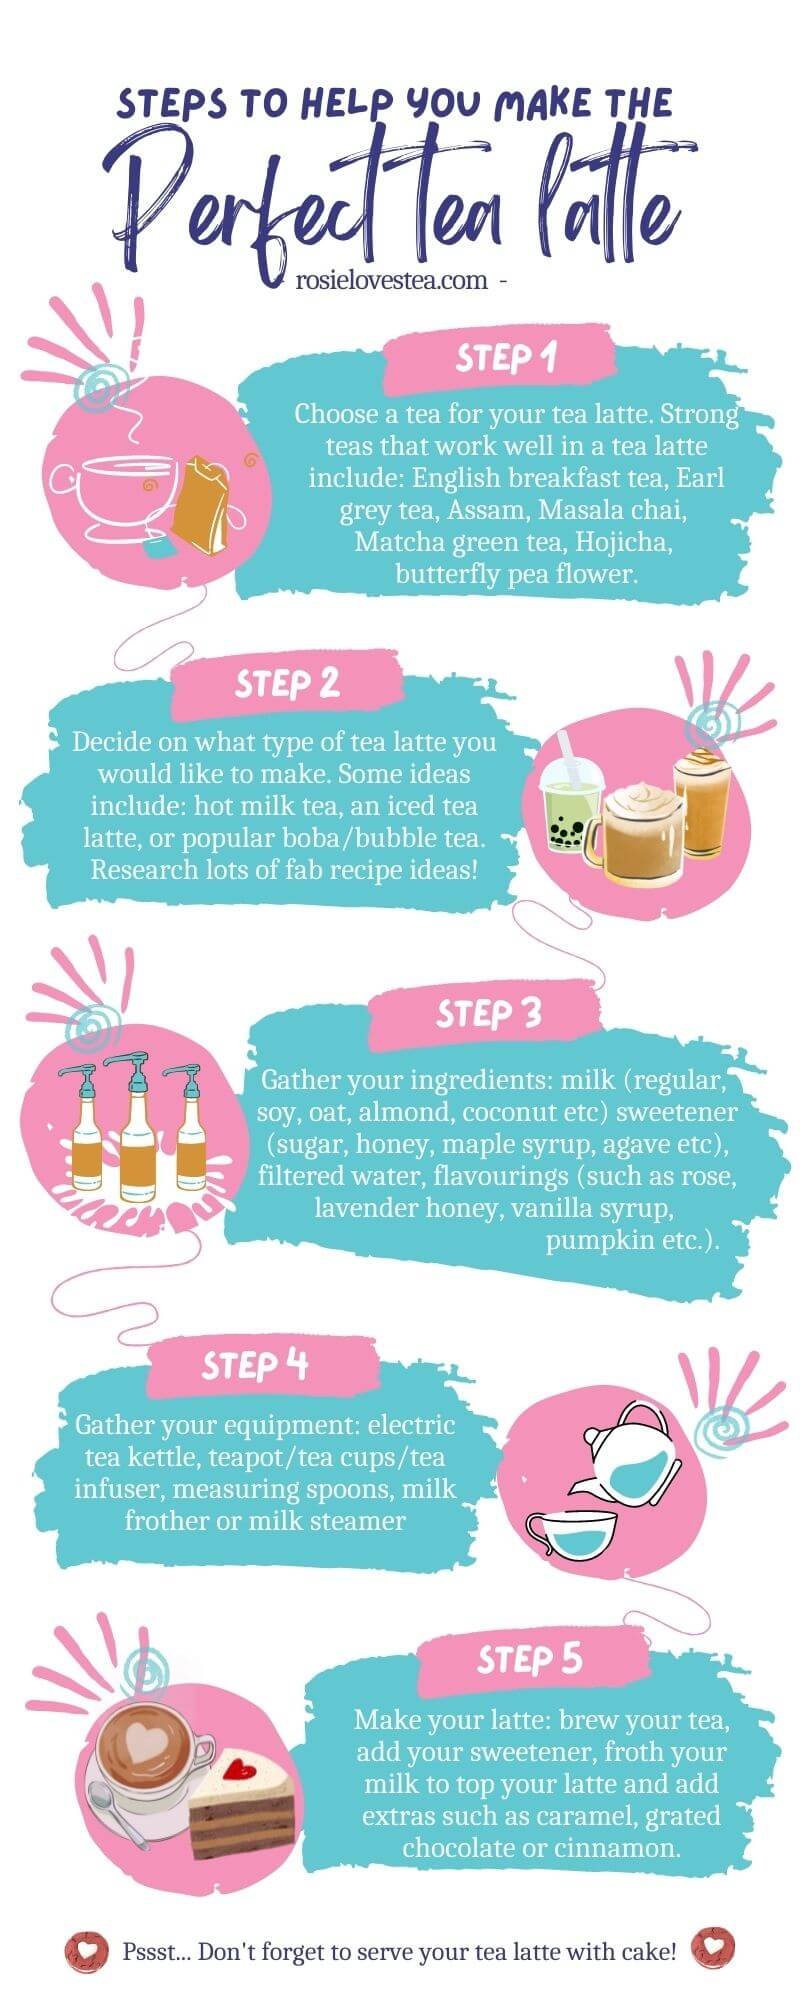 How to Make a Tea Latte at Home in 5 Easy Steps